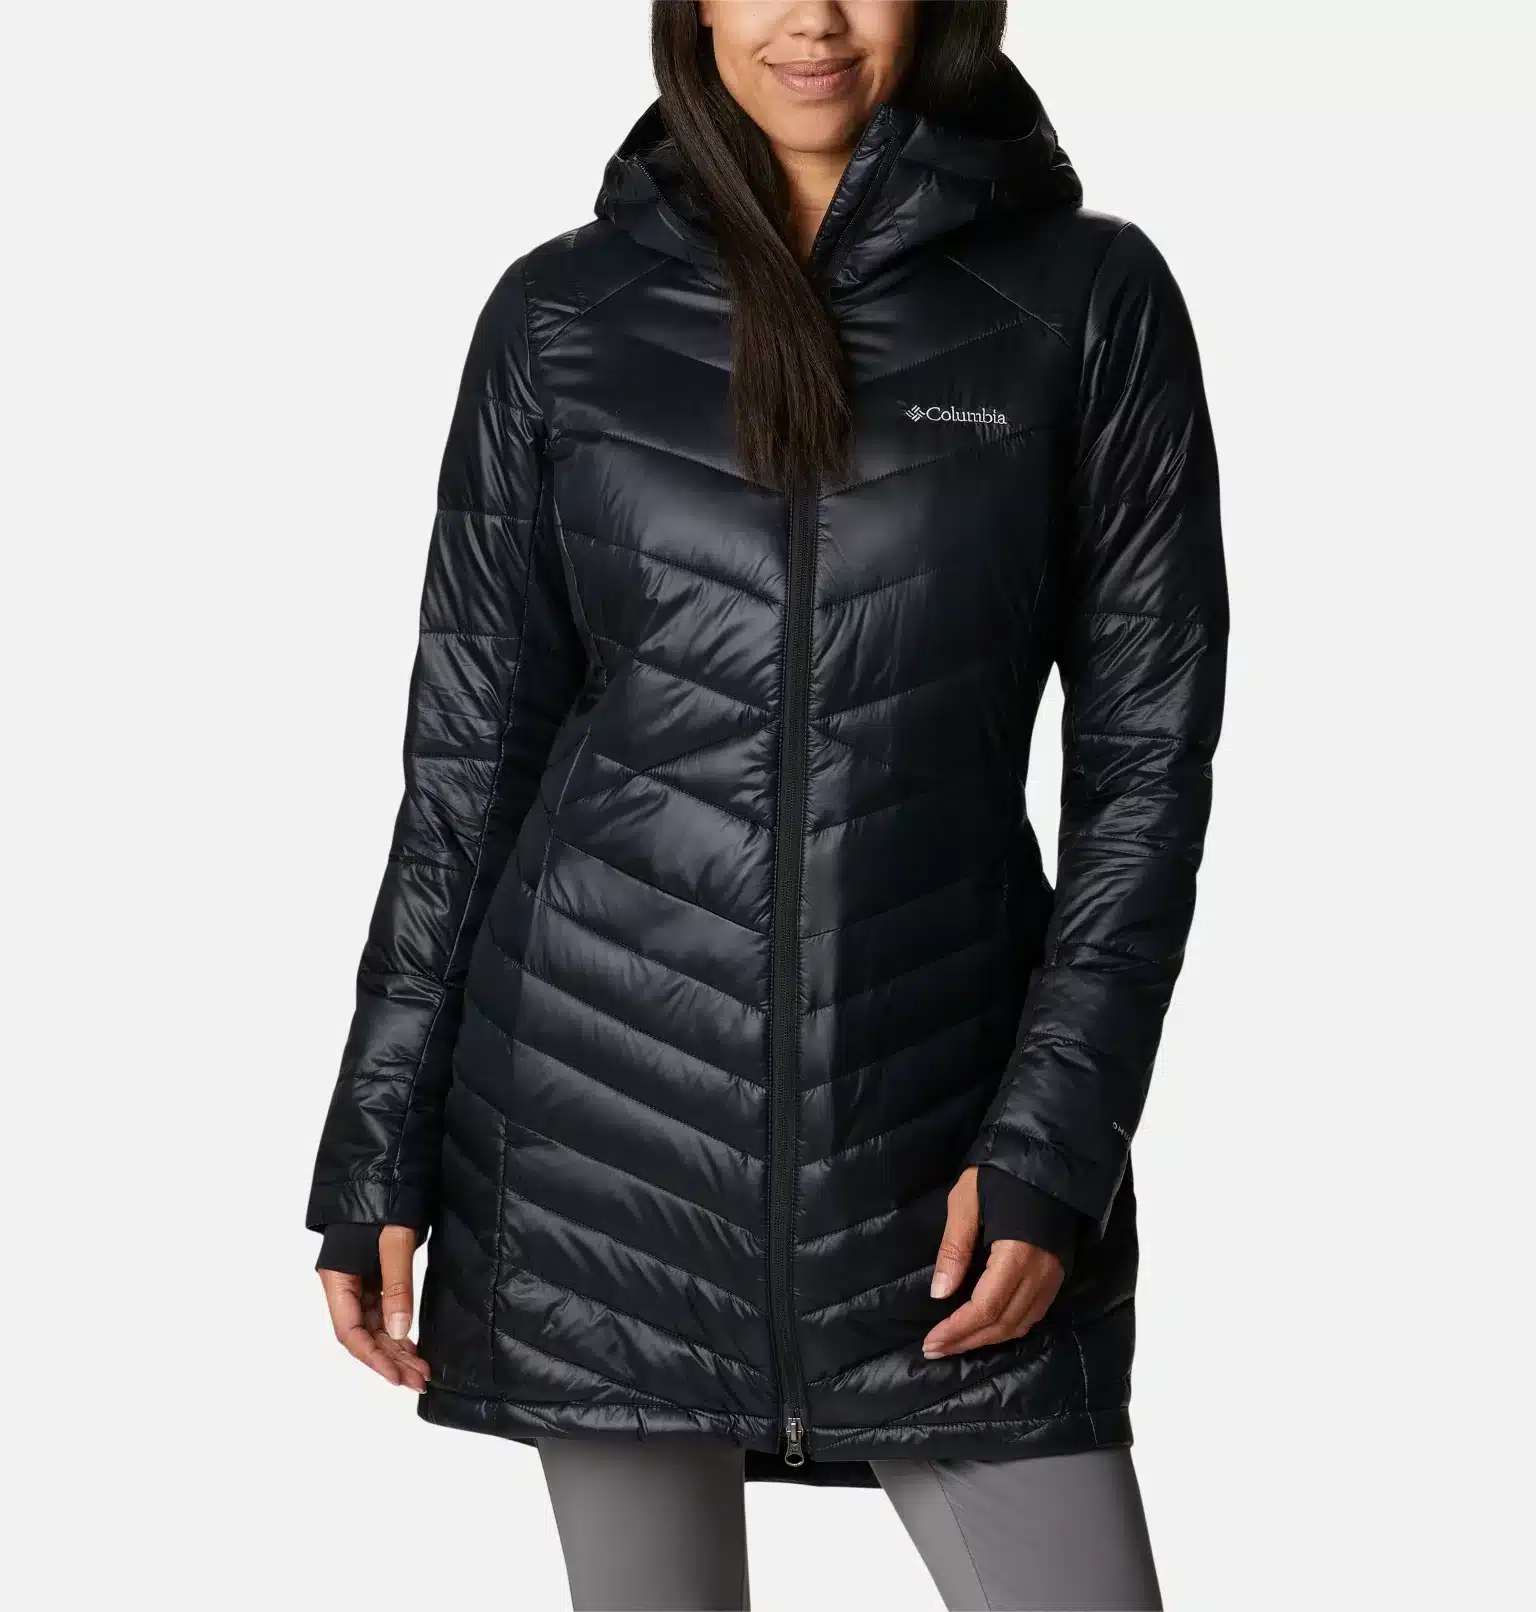 Puffer Hooded Jacket from Columbia that is perfect for your winter weather travel outfit.